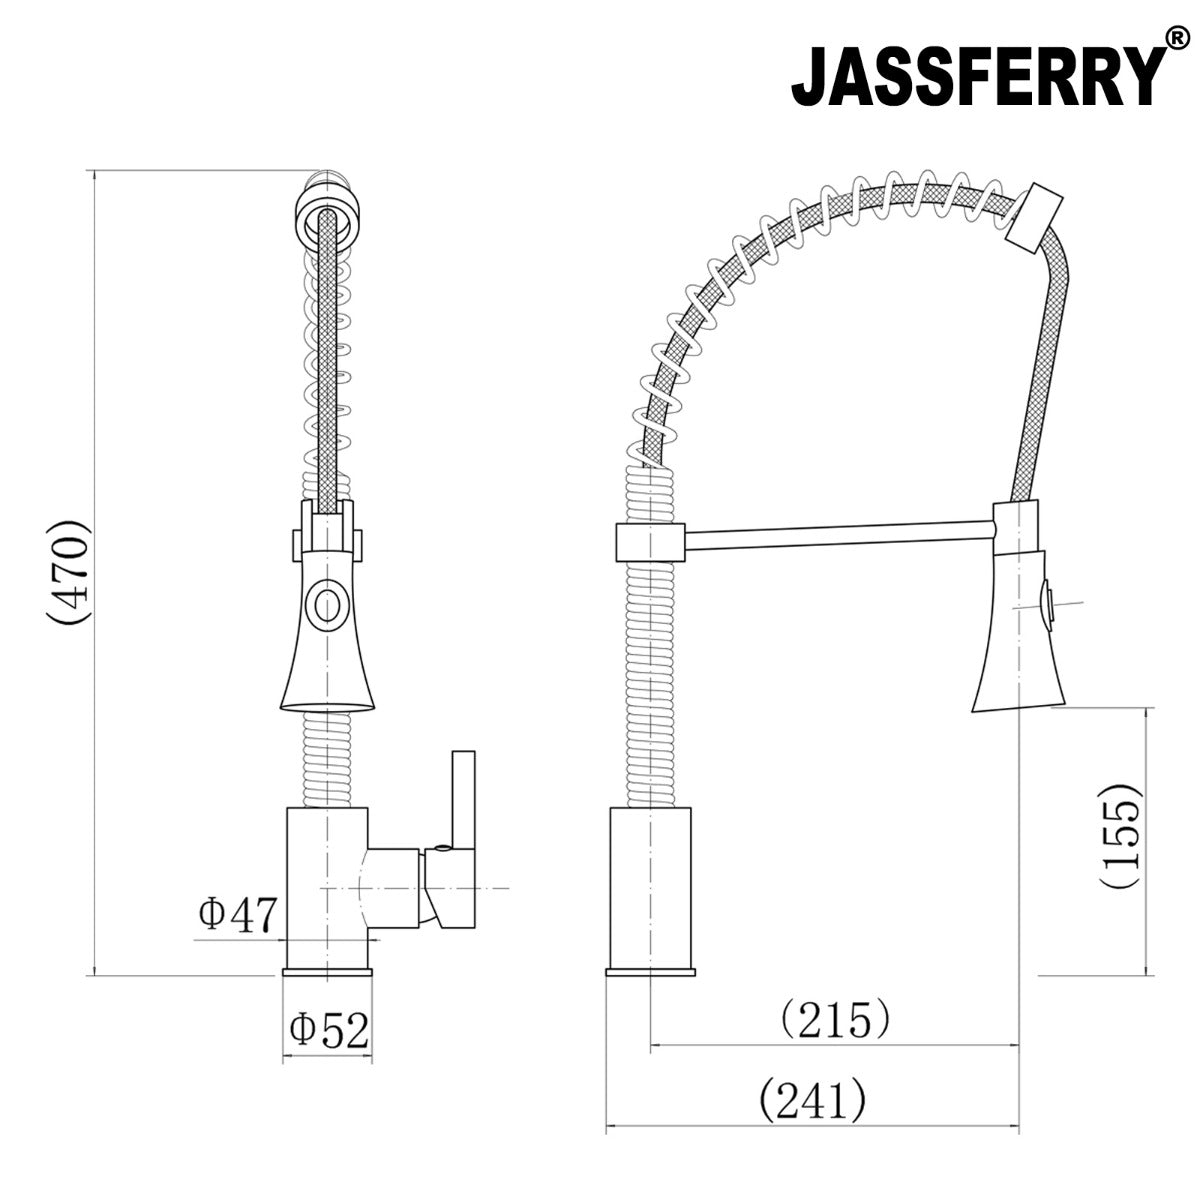 JassferryJASSFERRY Kitchen Sink Mixer Tap with Pull Out Spray Swivel Spout Pull DownKitchen taps